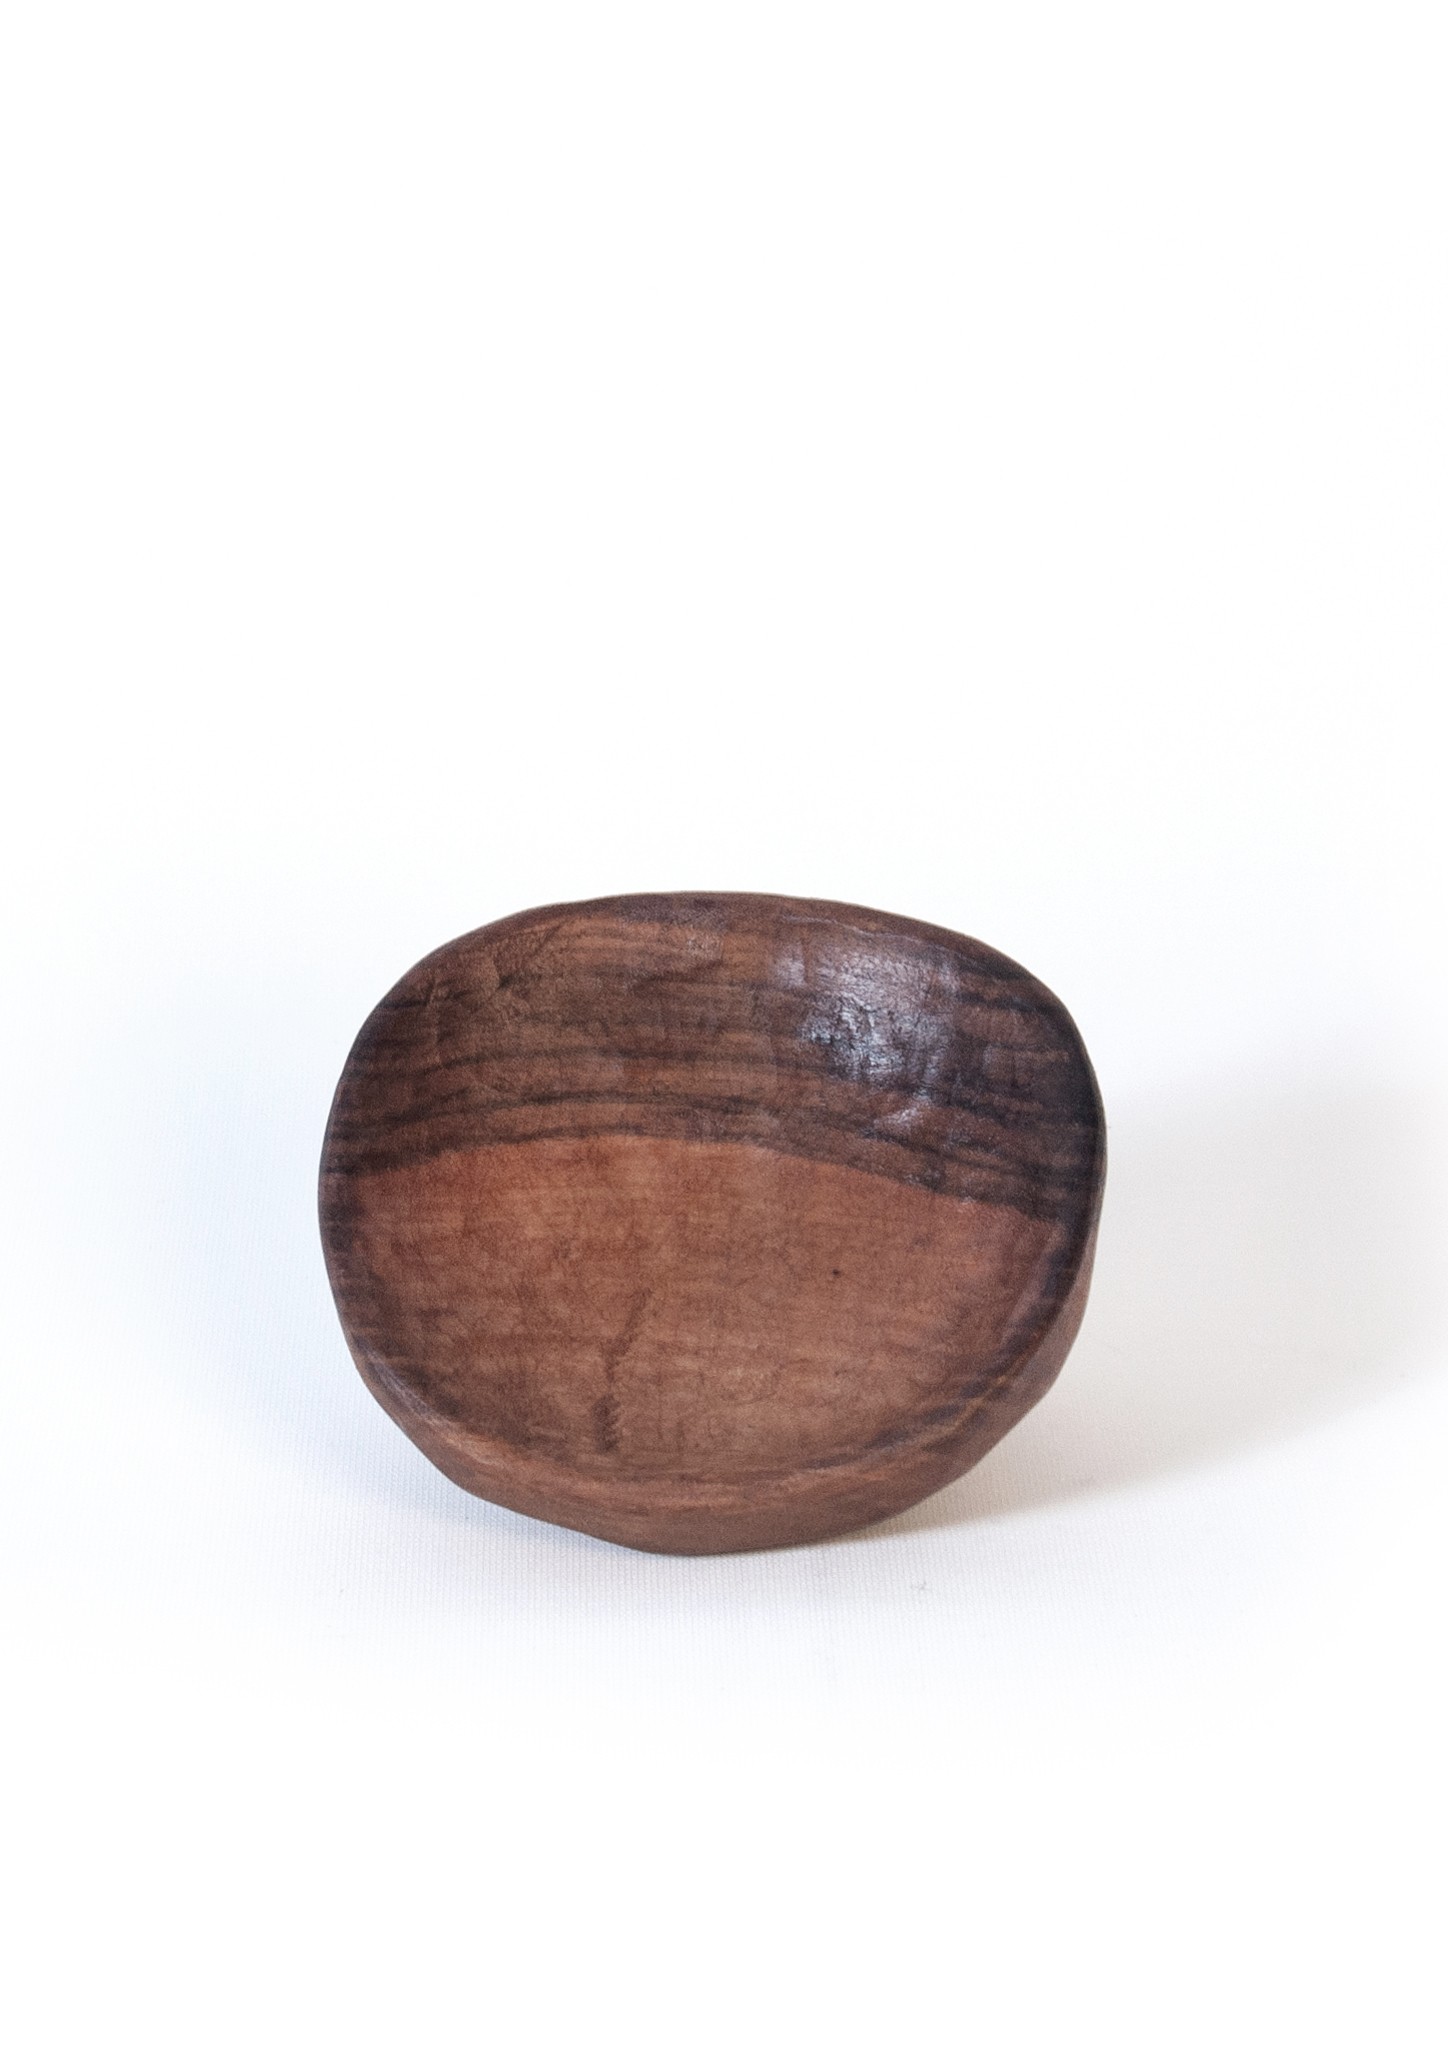 Hand Carved Wooden Bowl